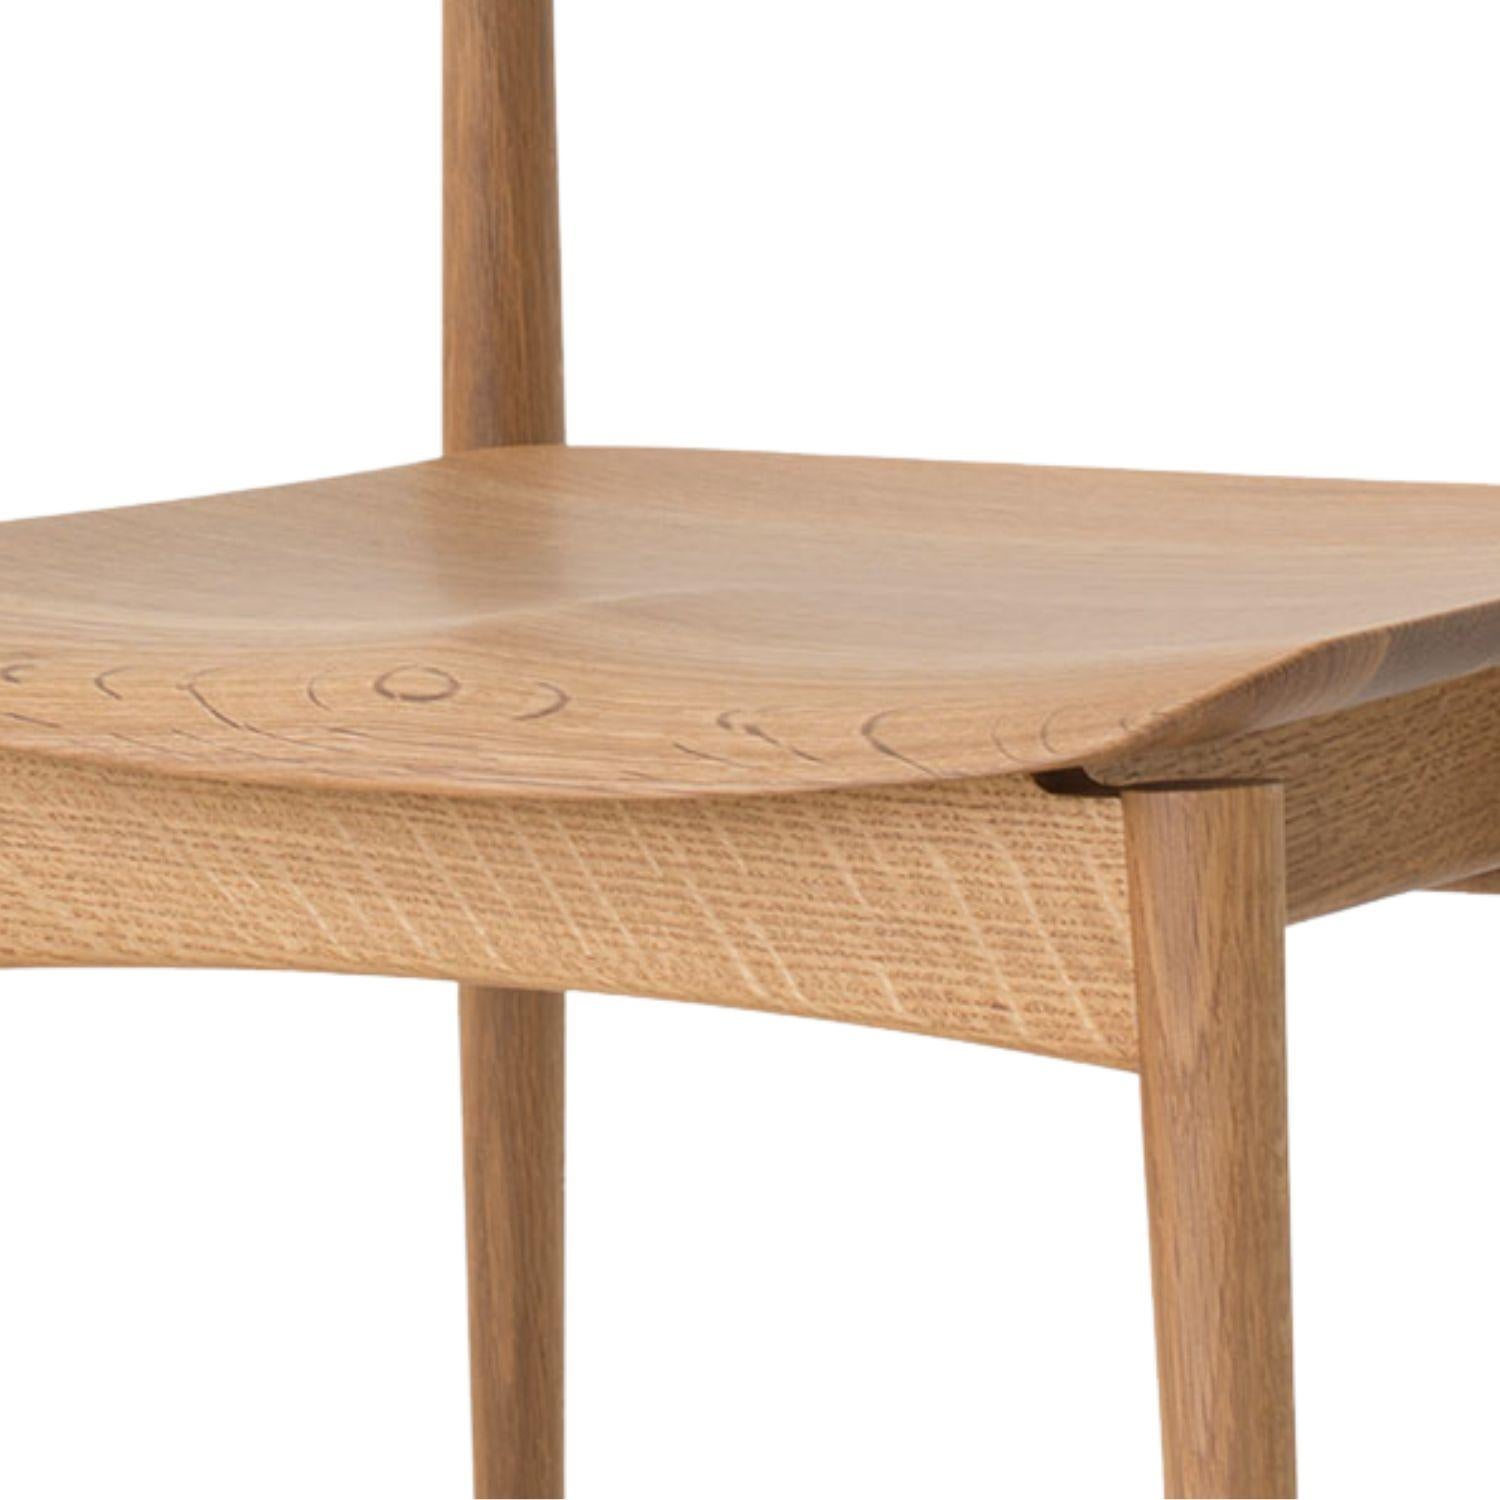 Motomi Kawakami 'Seoto KD201' Dining Chair in Oak and Upholstery for Hida For Sale 4